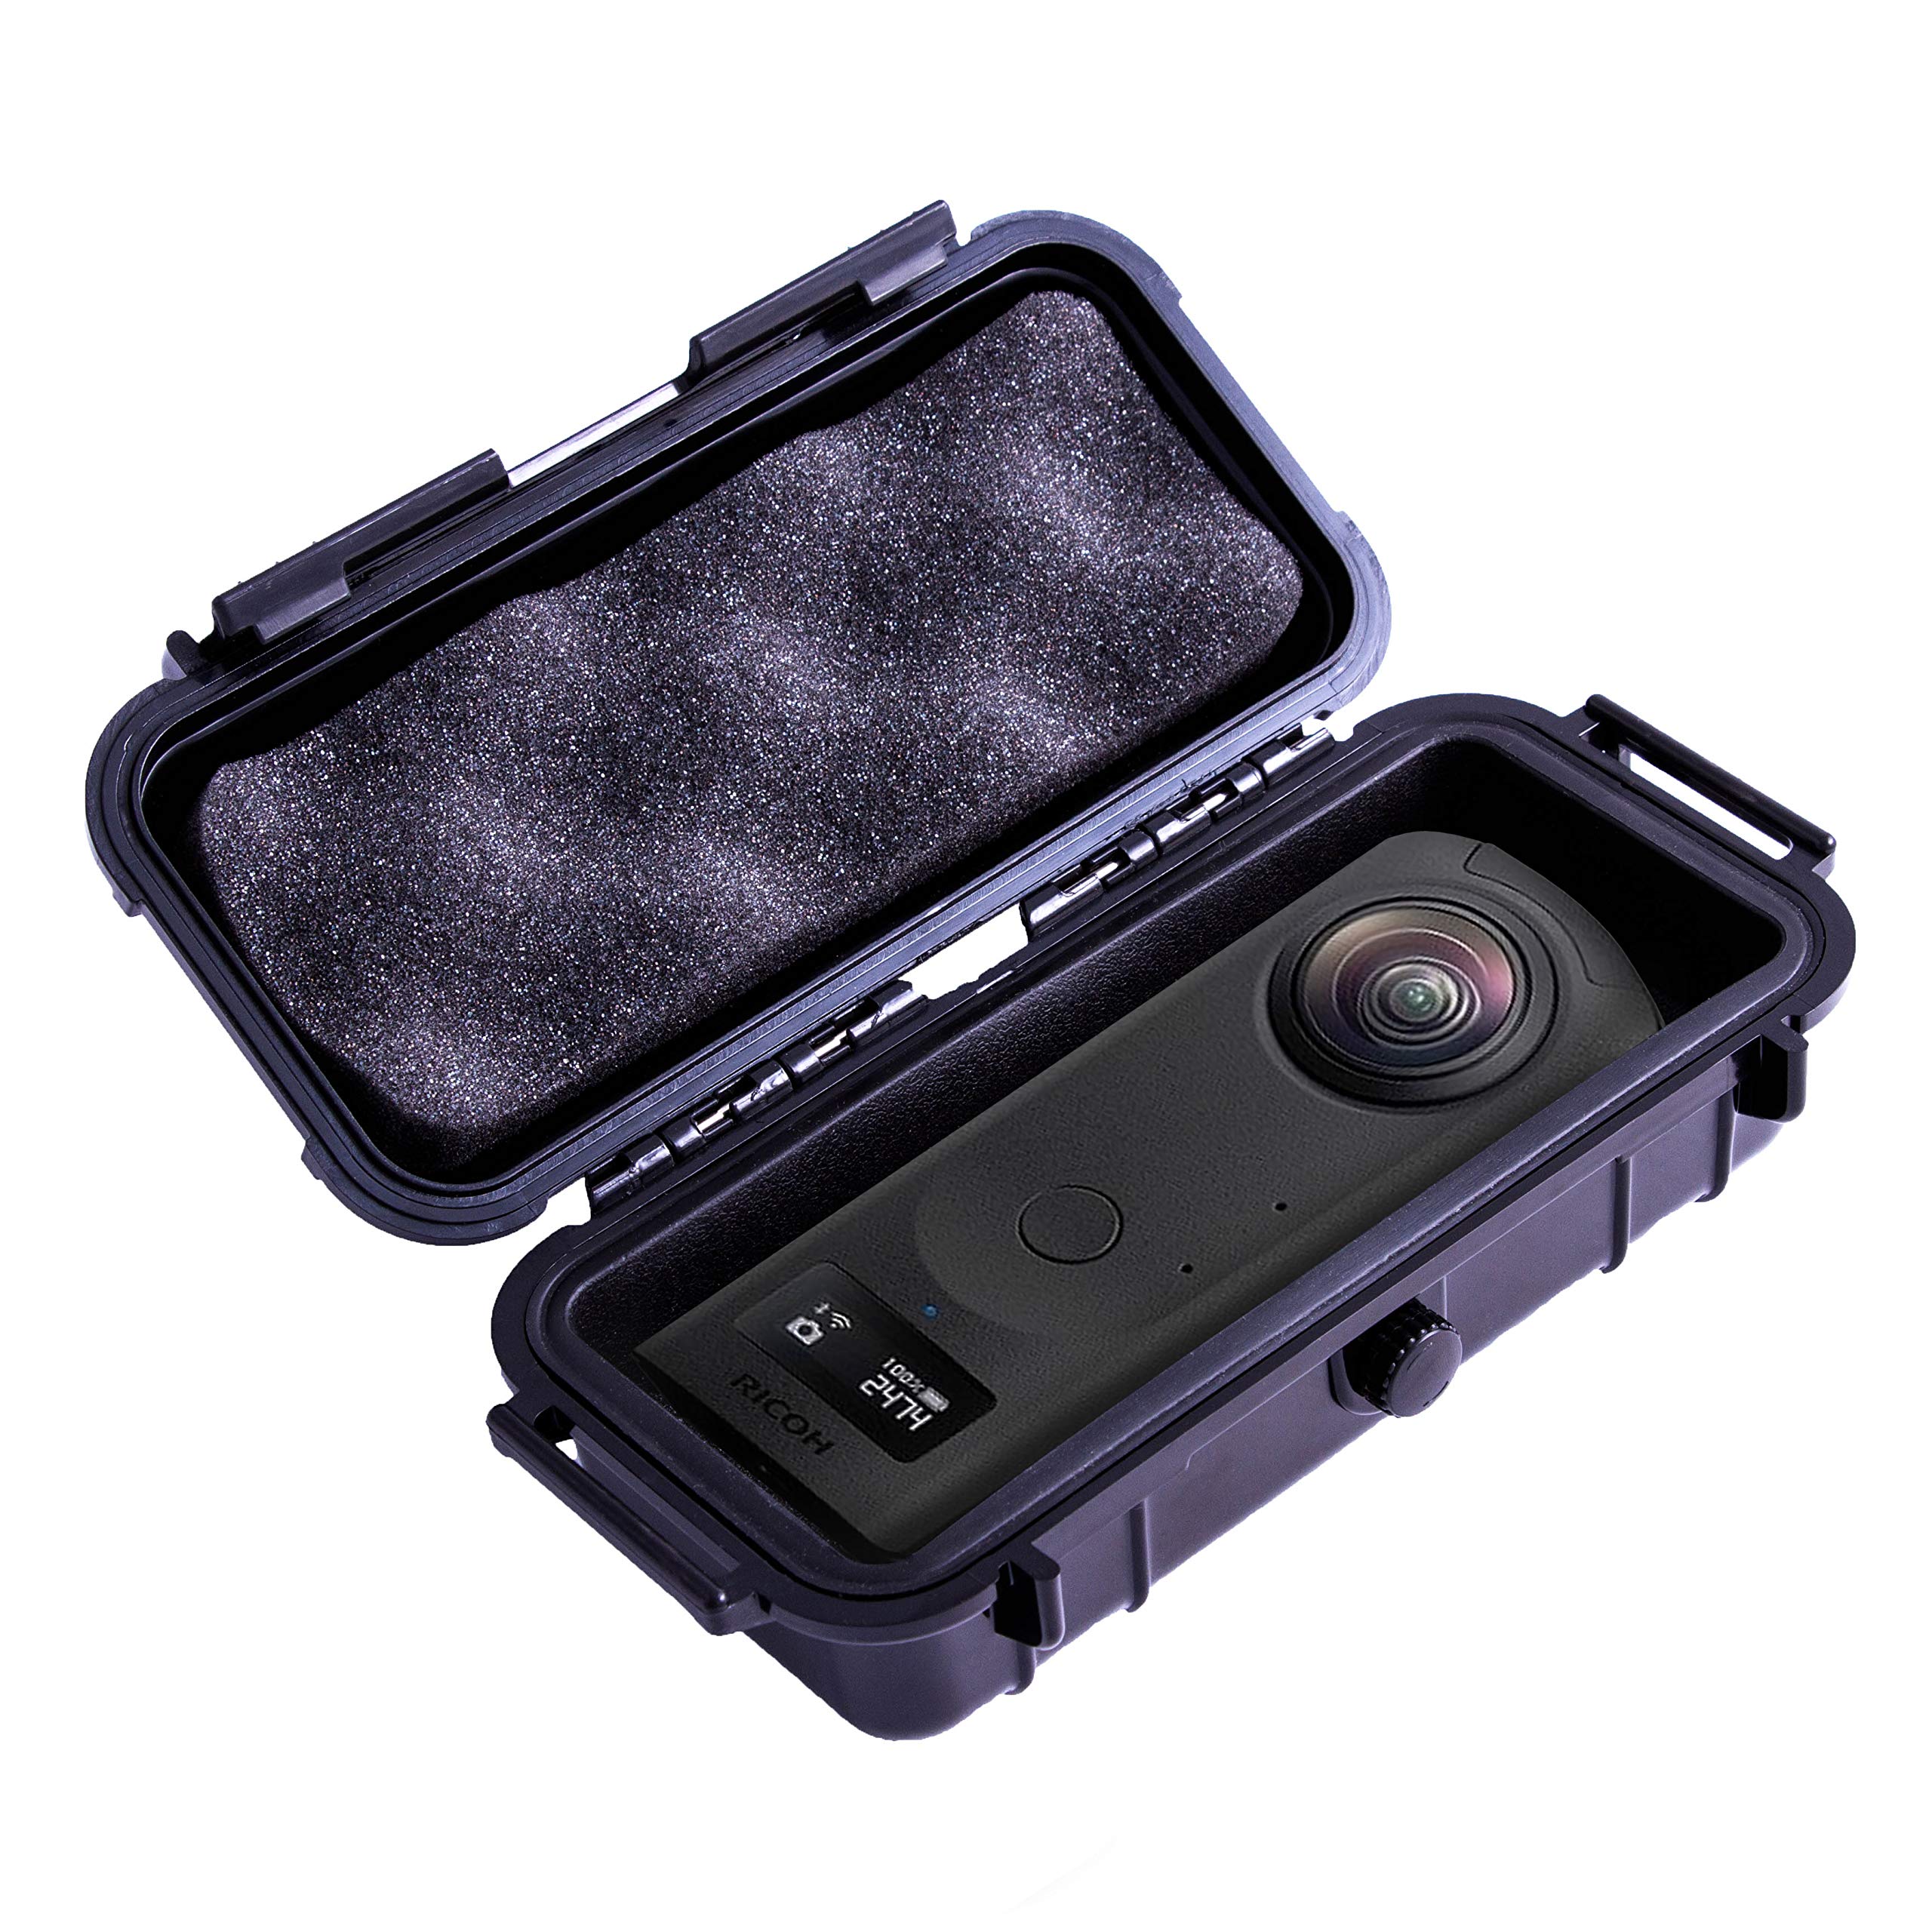 Casematix 7 inch Waterproof 360 Action Camera Case Compatible with Ricoh Theta Z1 360 Degree Camera, Case Only